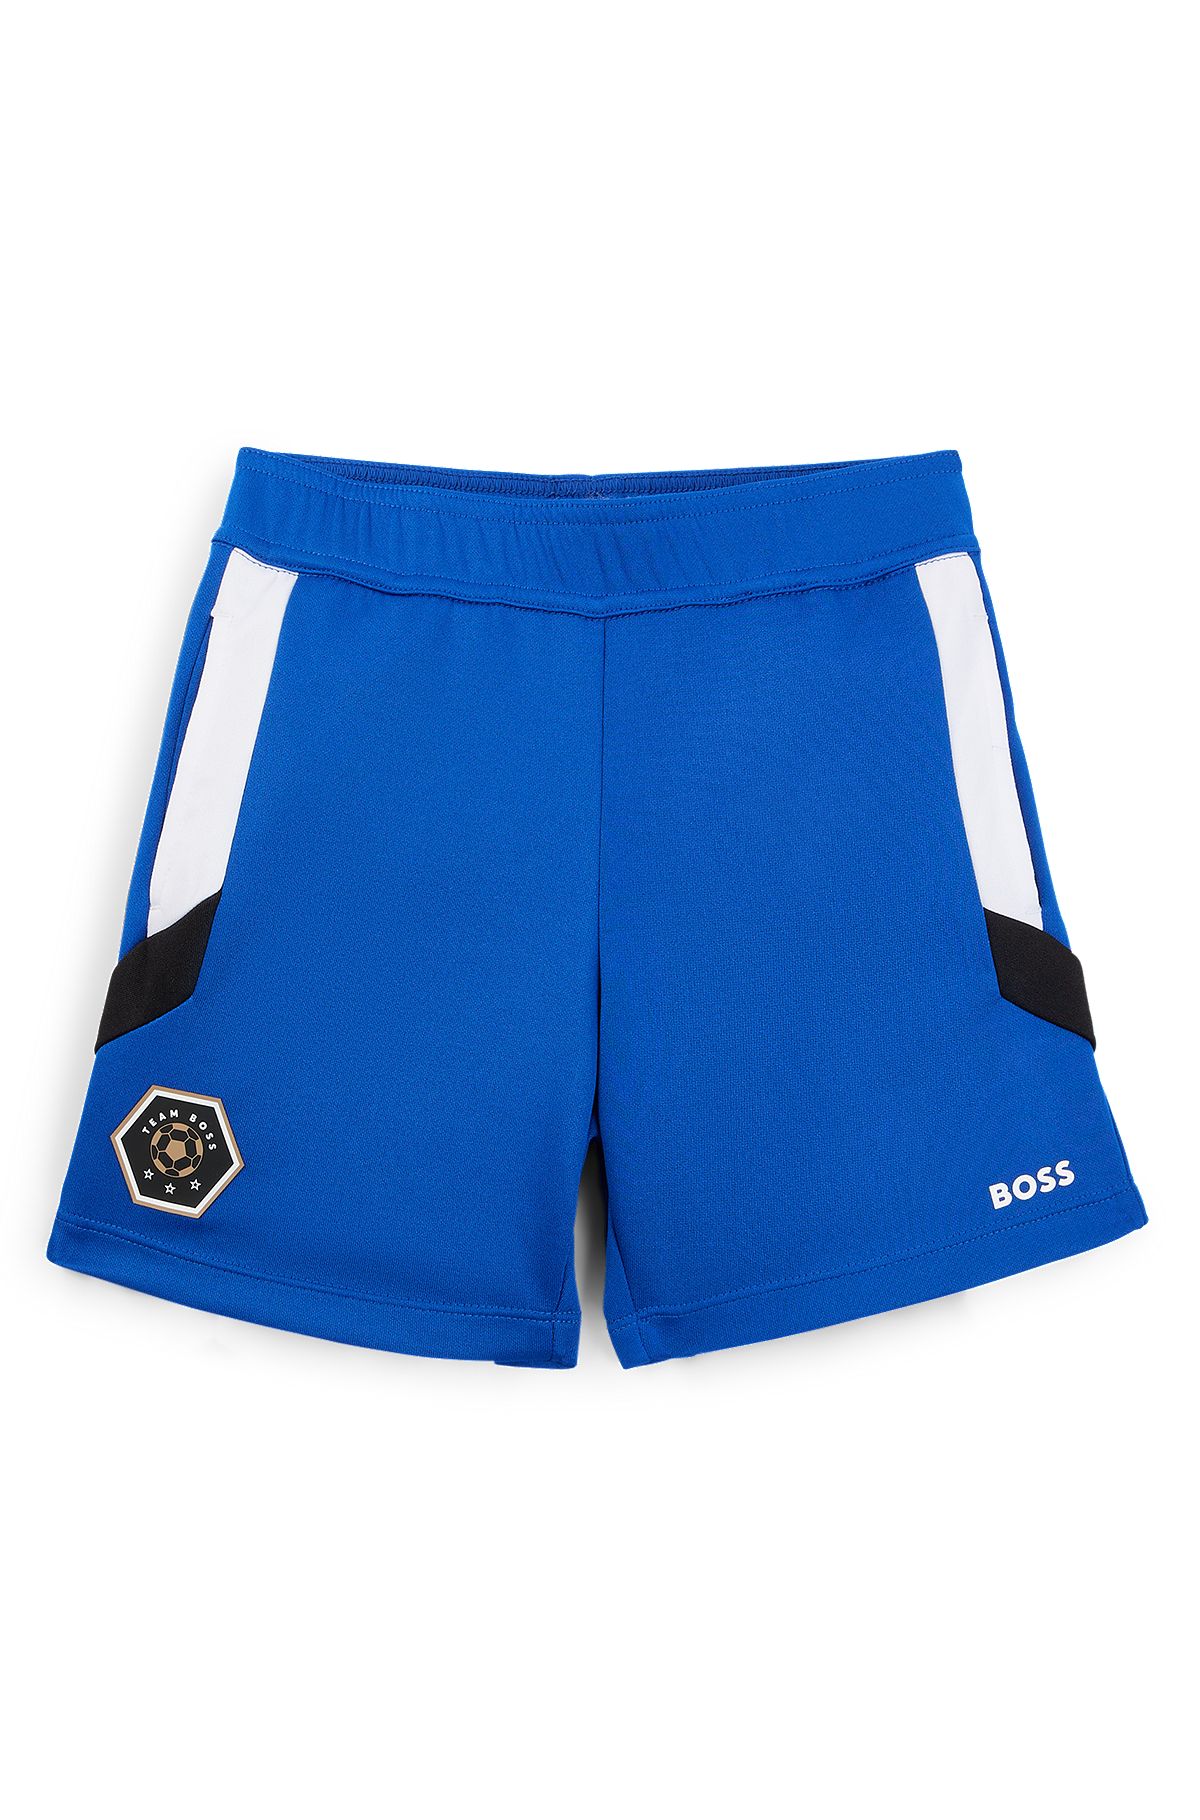 Kids' shorts with signature details, Blue